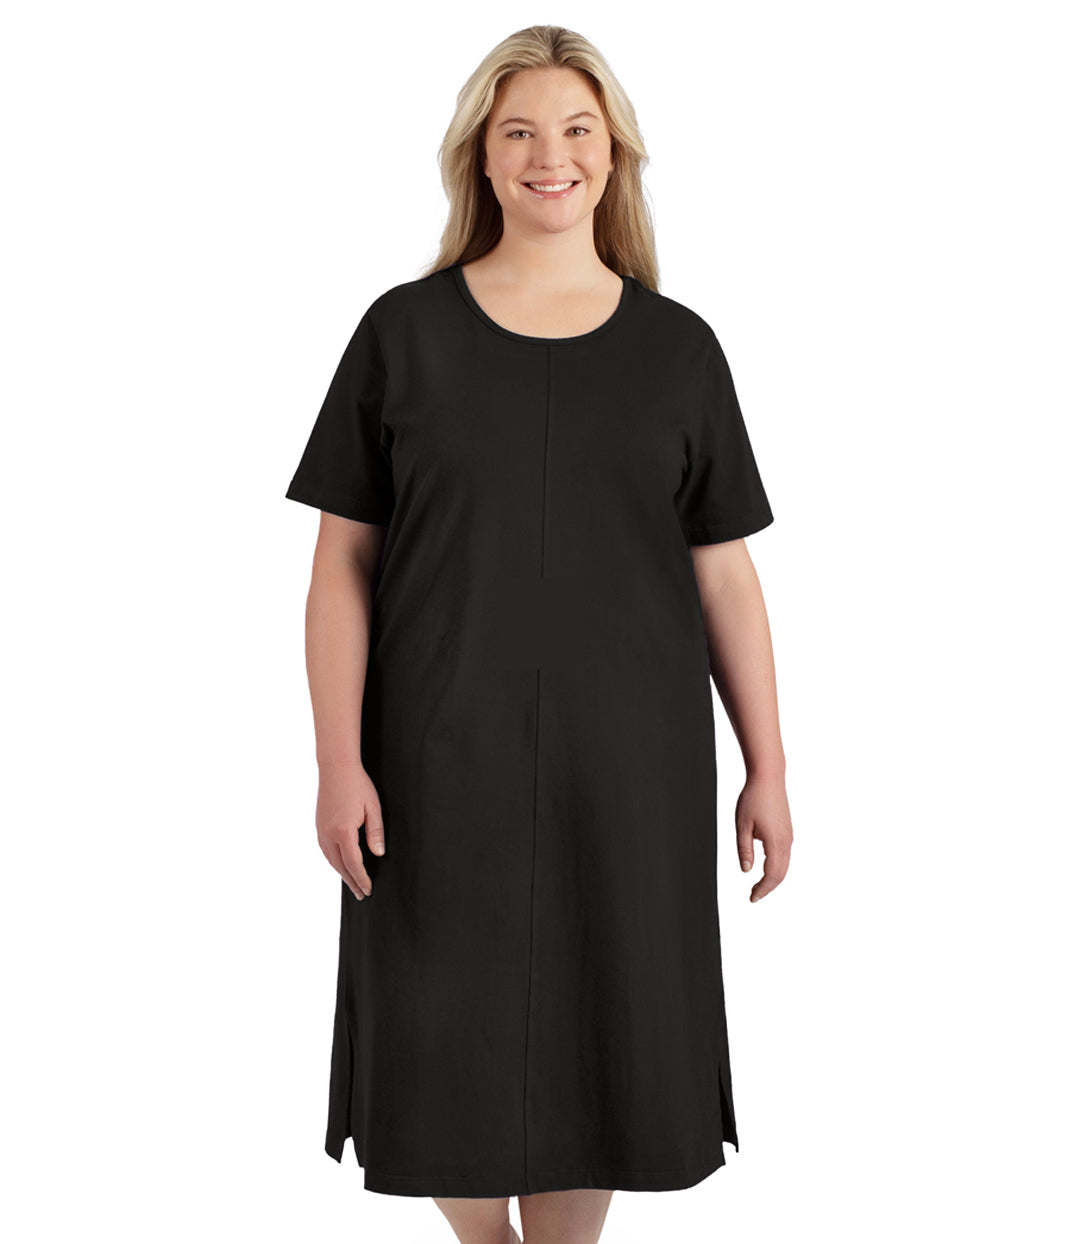 Plus size woman, facing front, wearing JunoActive’s Stretch Naturals Short Sleeve Dress in color black with her hands by her side.